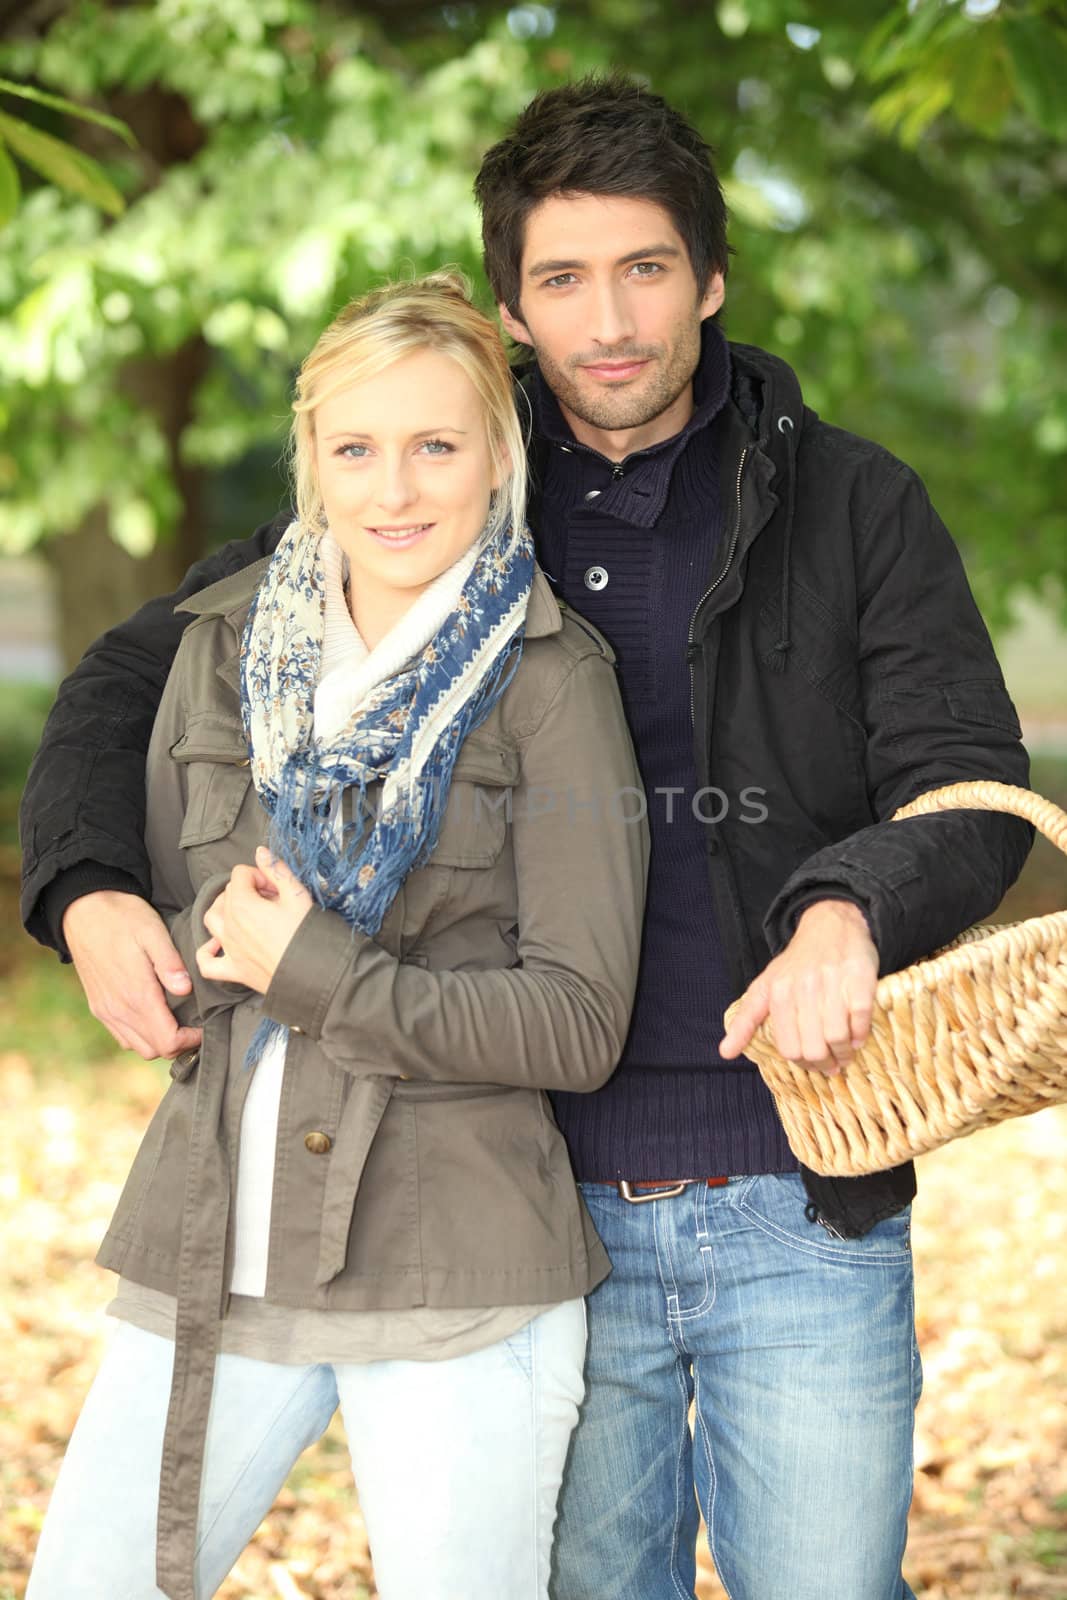 Couple with a basket